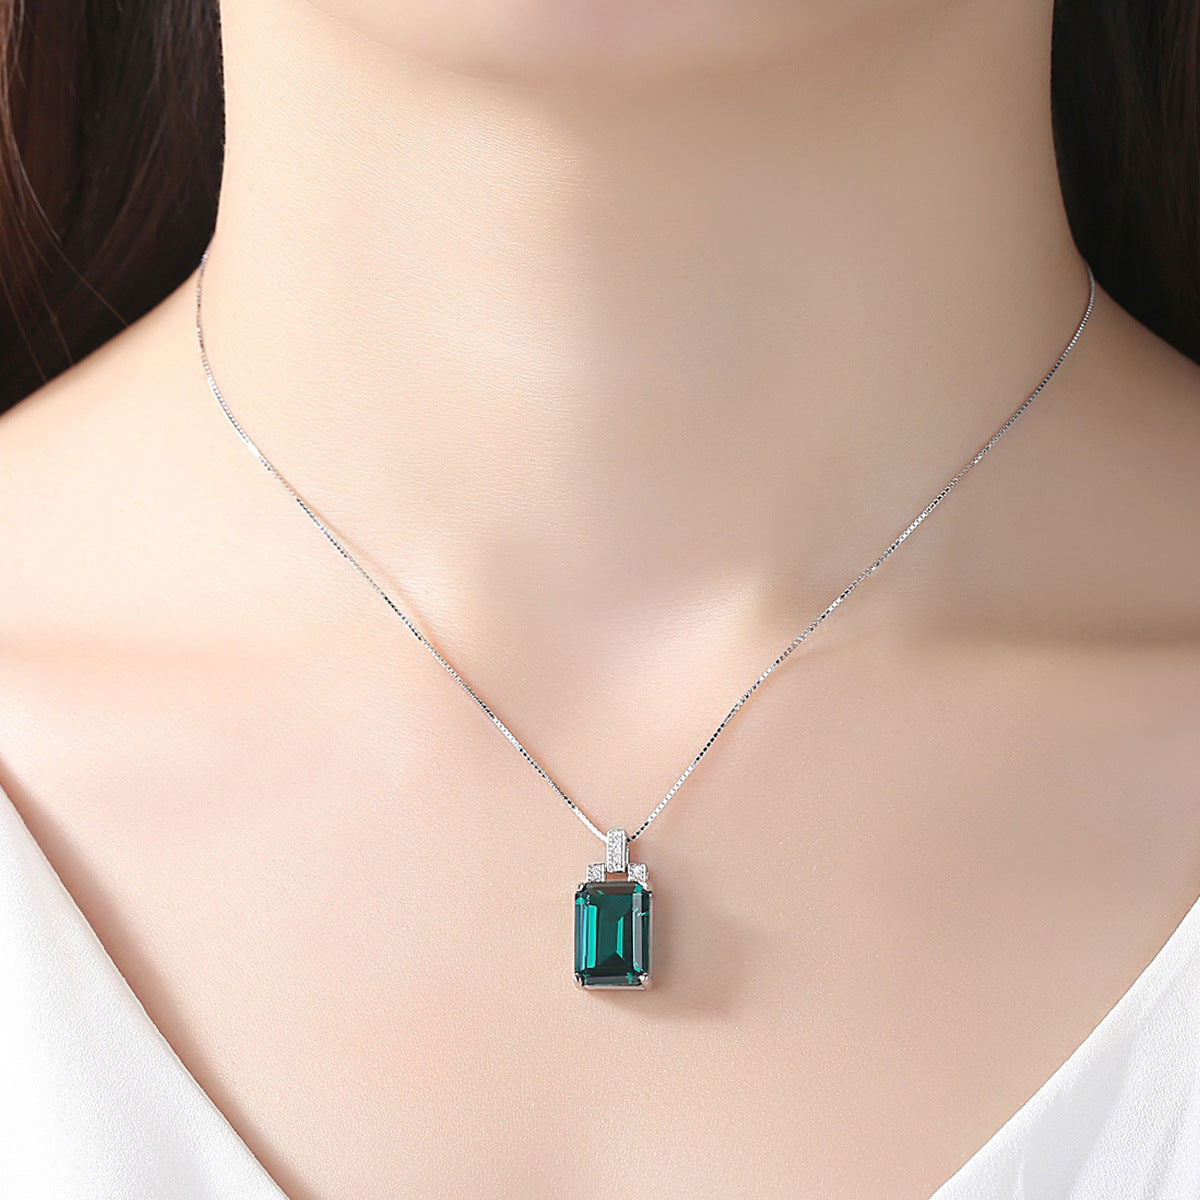 Gemstonely- Elegant and Sophisticated: 925 Silver Necklace with Simulated Gemstone Pendant and Micro Inlay for a Timeless Appeal